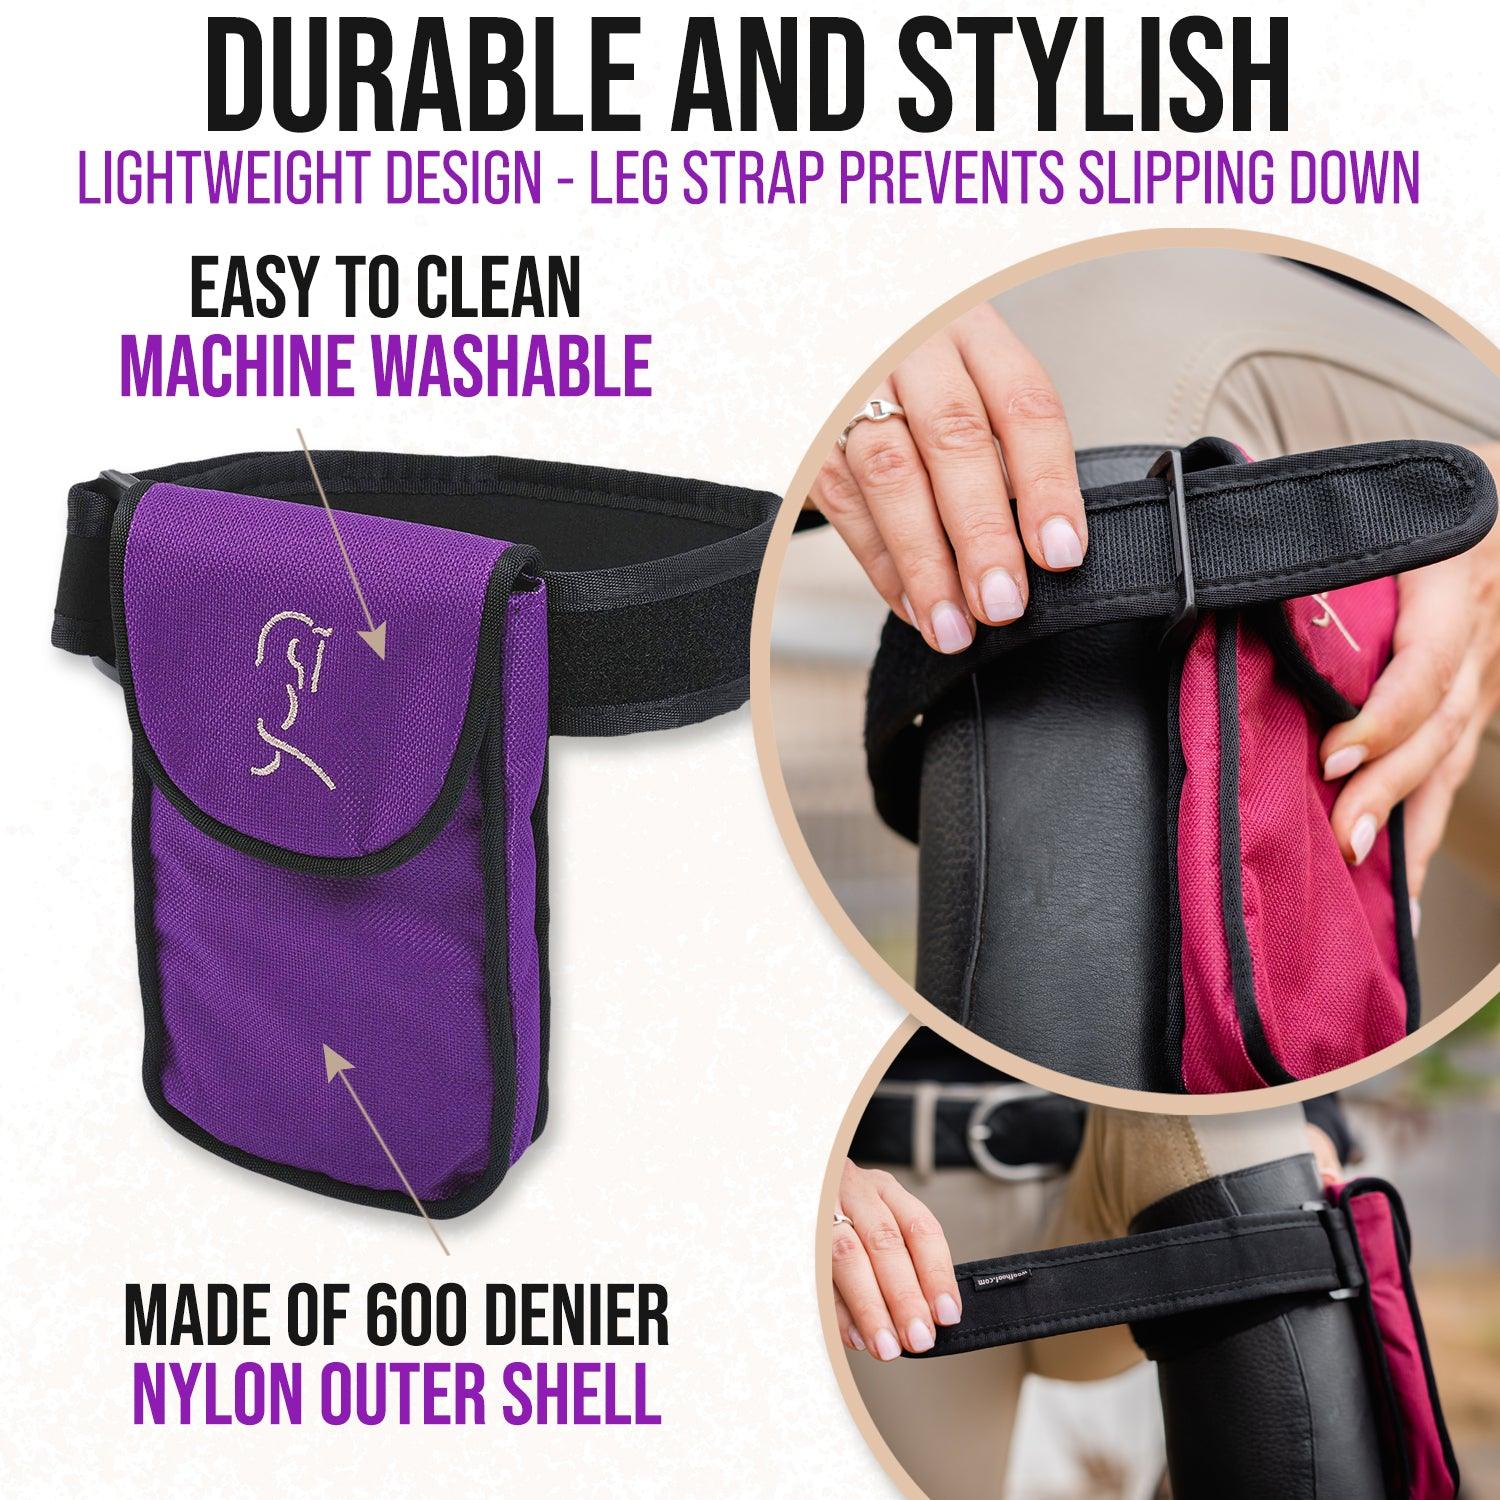 Purple equestrian cell phone case that is durable and stylish